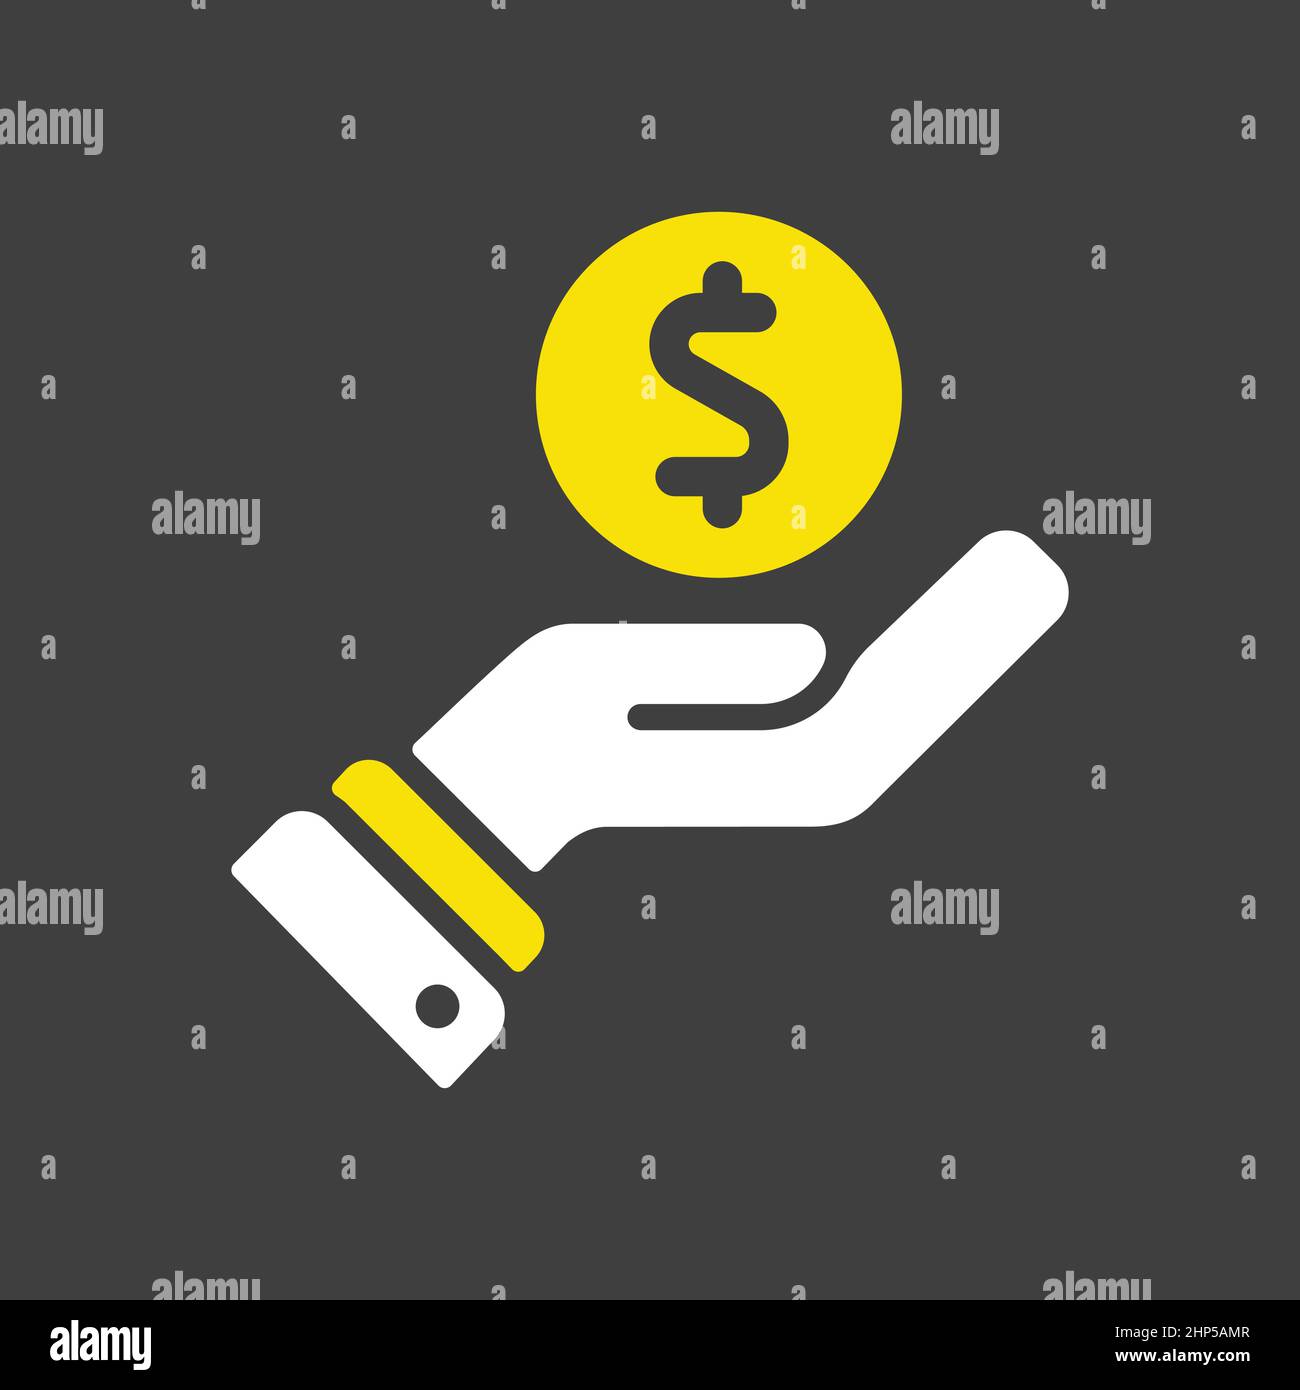 Pictograph of money in hand icon vector Stock Vector